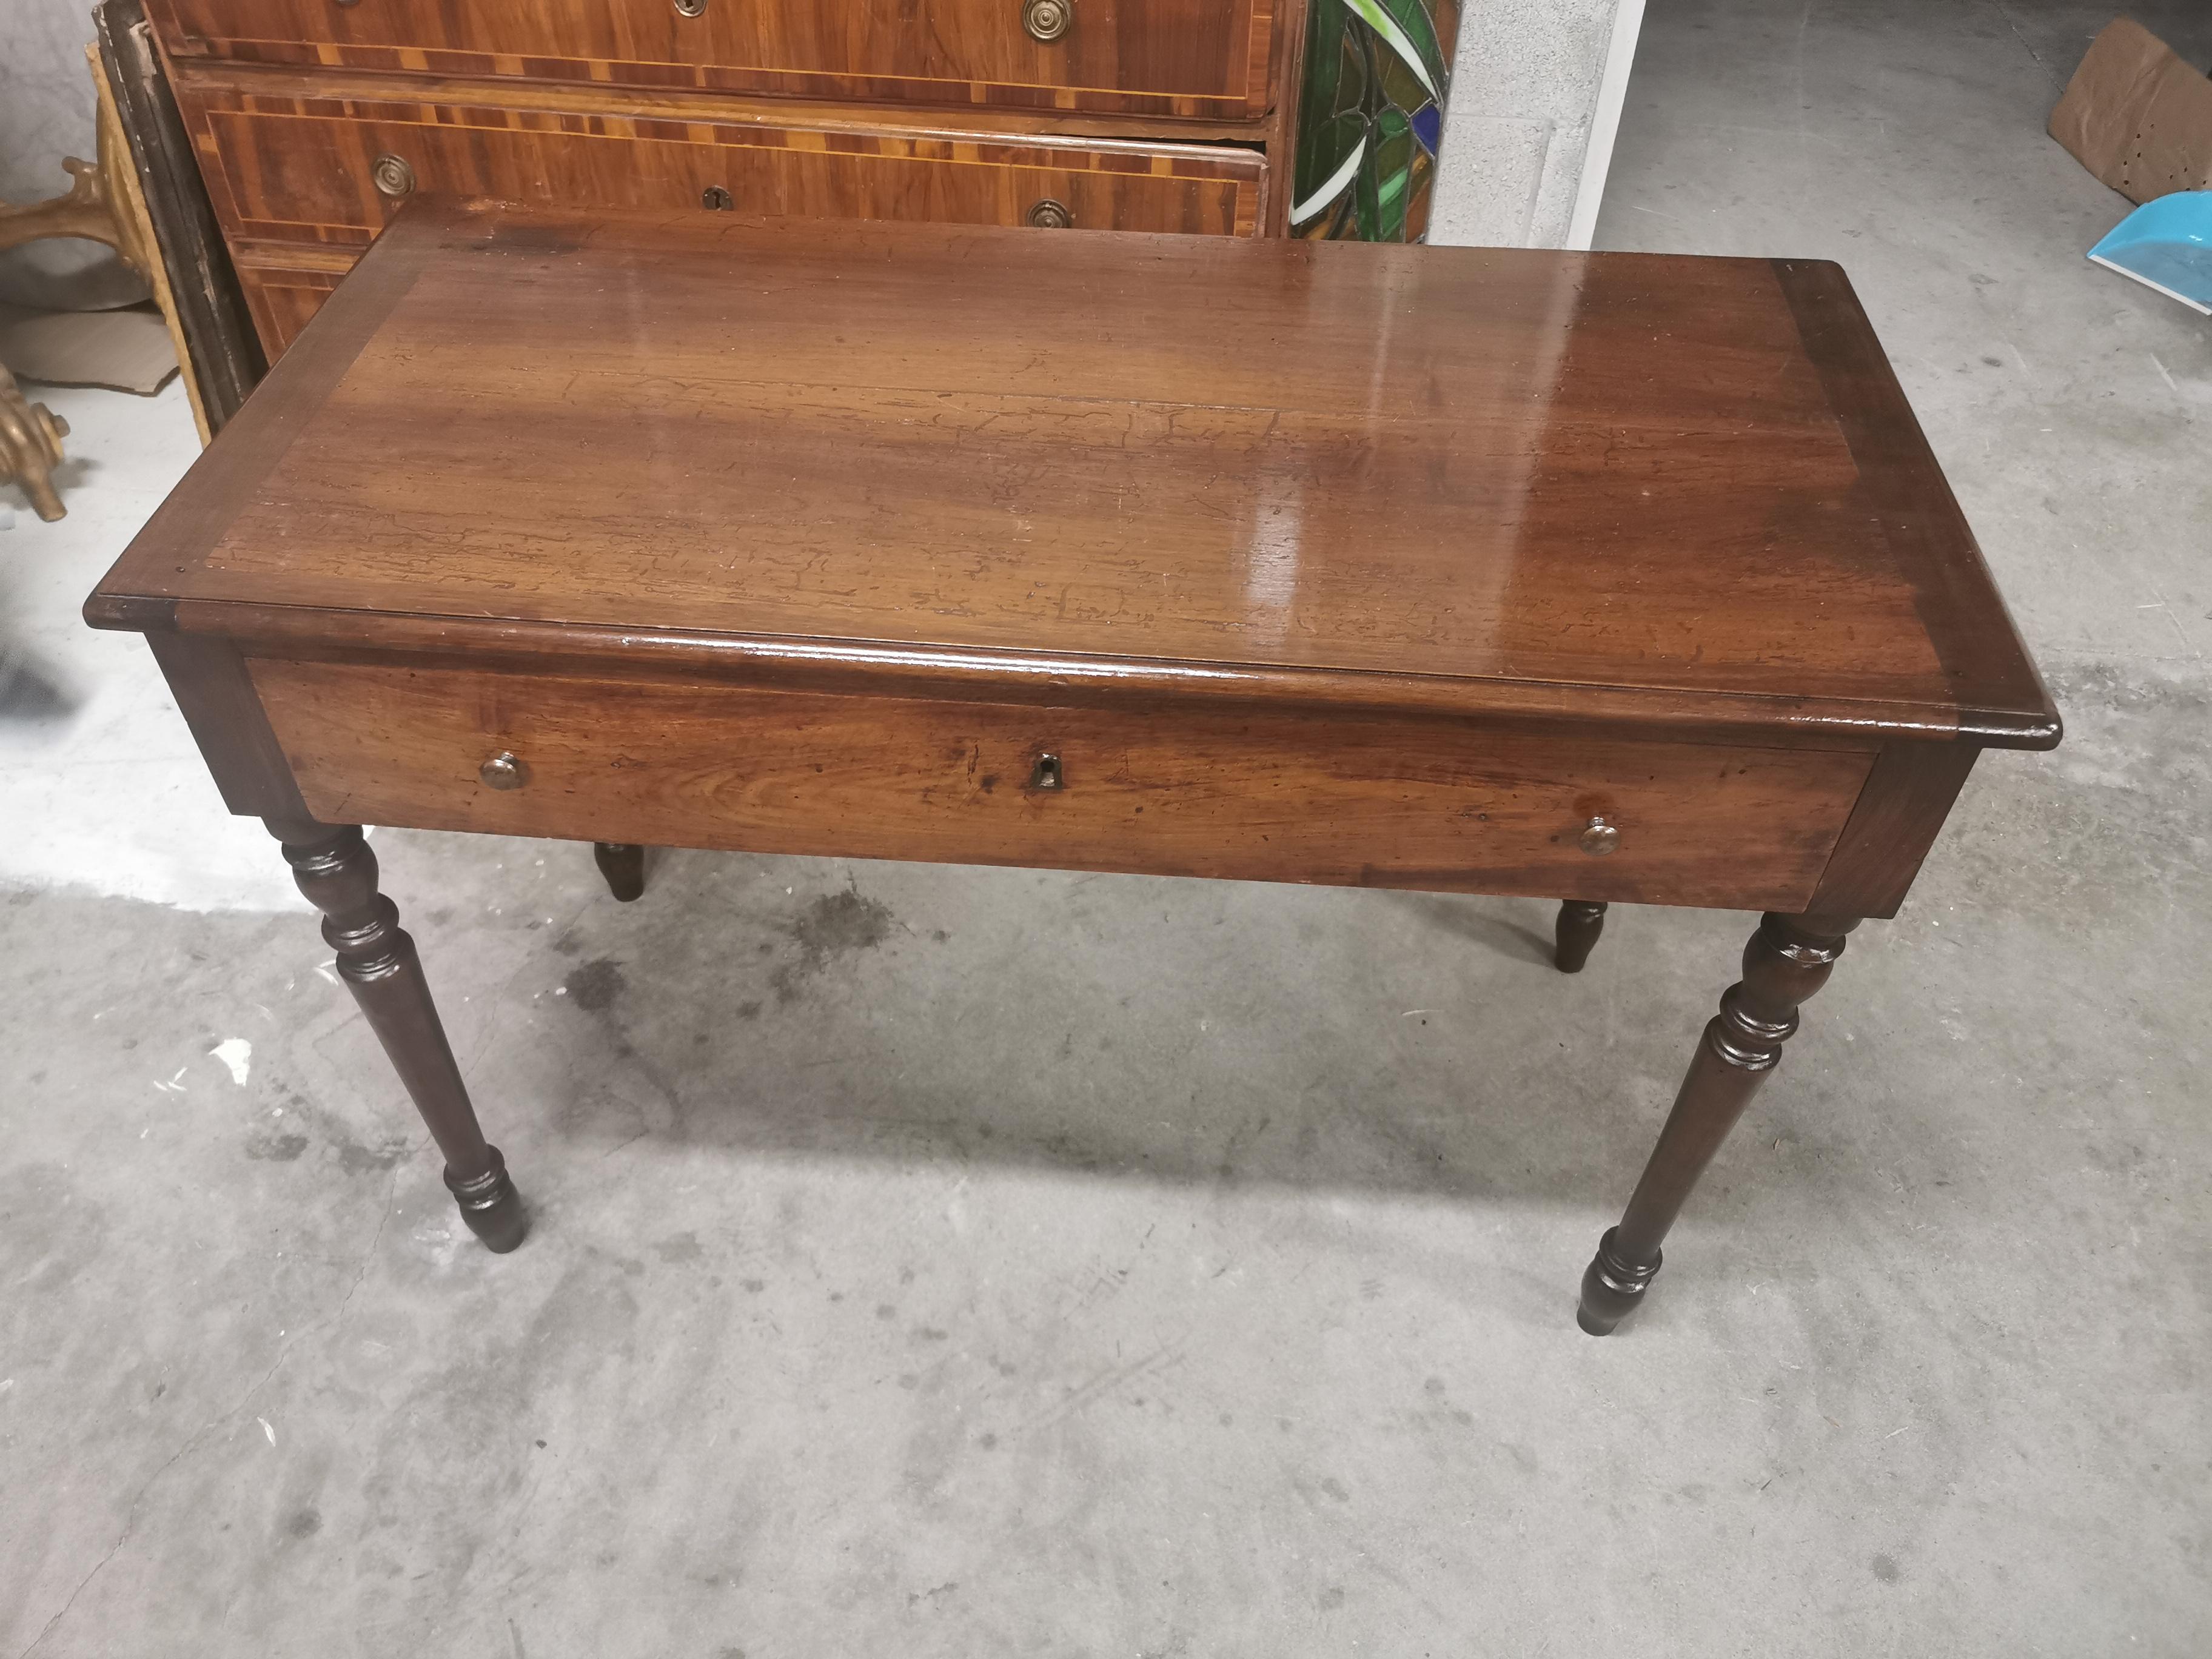 Louis XVI Writing table, A walnut writing table from the Piedmont Region c 1810.
In very good condition with minor signs of agings.
Quality walnut 1 piece top and legs.
The top walnut is thick and particular
Seller location : Torino Italy.